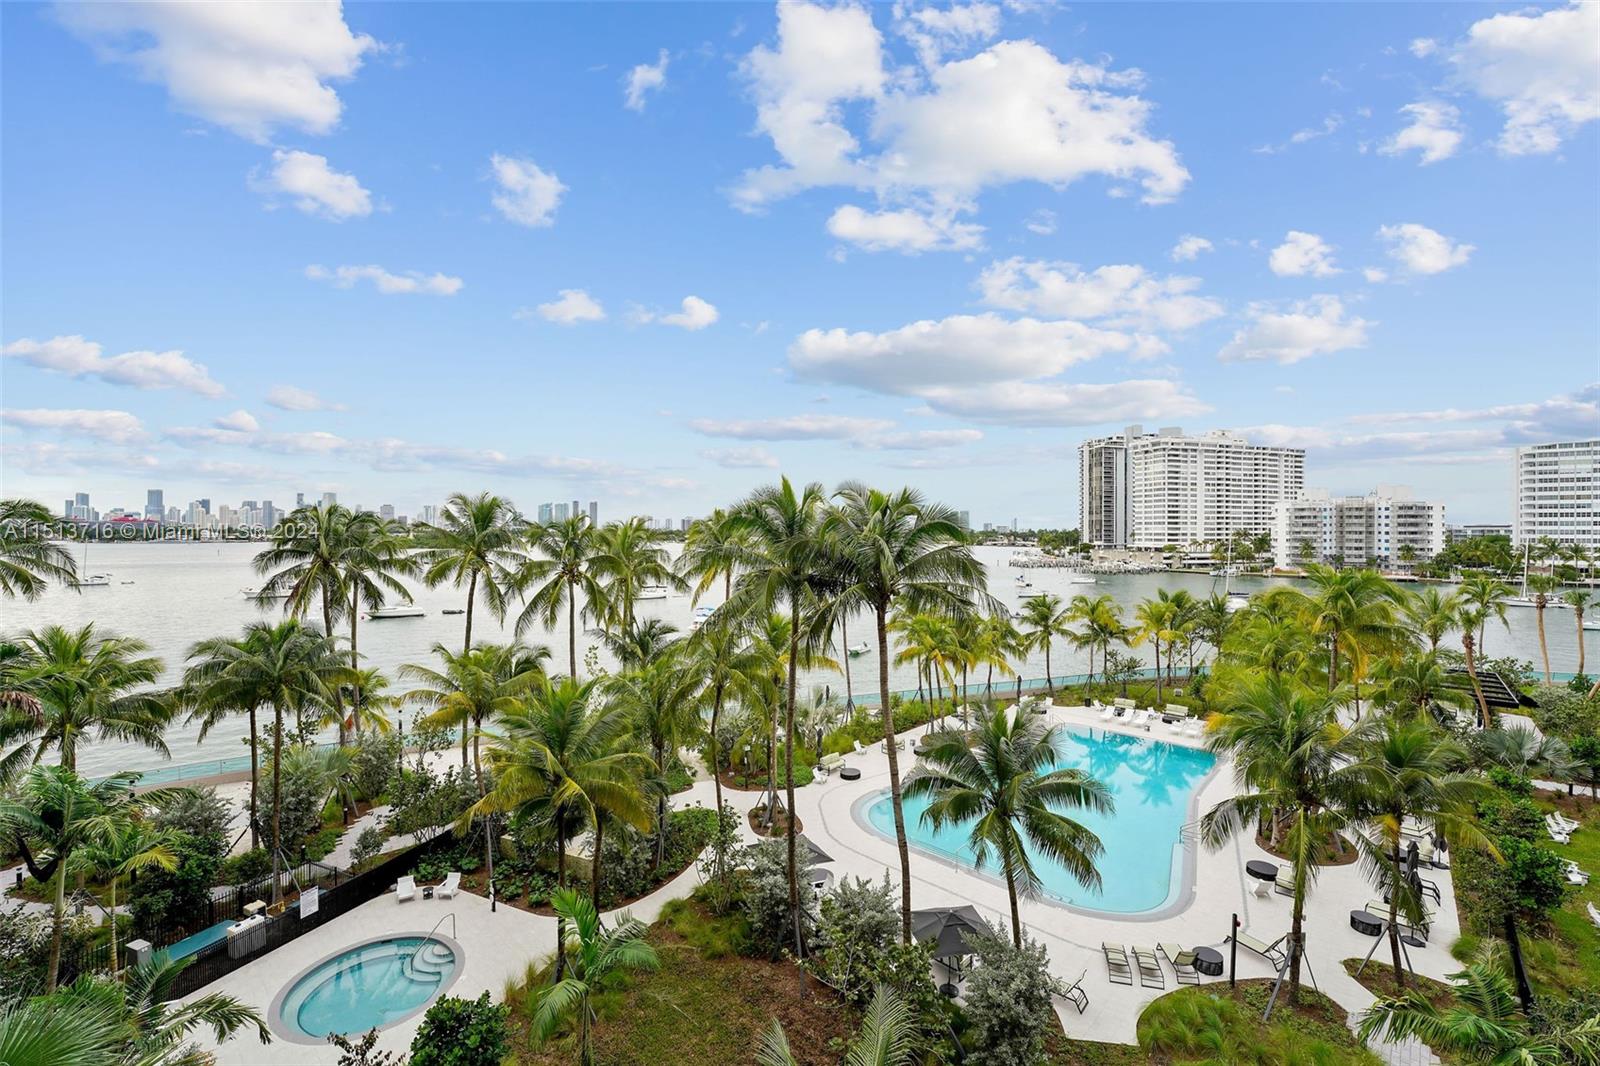 AVAILABLE 03/16 (UNIT CAN'T BE SHOWN TILL AVAILABLE DATE). Welcome to Flamingo Point. This 1/1 Features warm wood tile flooring, marble countertops, modern kitchen with Stainless Steel Appliances, floor to ceiling sliding glass doors, large walk-in closets with custom built-ins and private elevator entry. Amenities include a fitness club, spa, resort style bay front pool cabanas, restaurants & much more. Move in costs are 1st month + $1500 deposit. Parking cost 1st vchl. $124 p/m. *FAST APPROVAL! (NOTE: Rental rates are subject to change depending on move-in date and lease term. Advertised rate is best rate and maybe on leases longer than 12 months. Income must be greater than 3x one month's rent and minimum credit score of 620 in order to be approved).